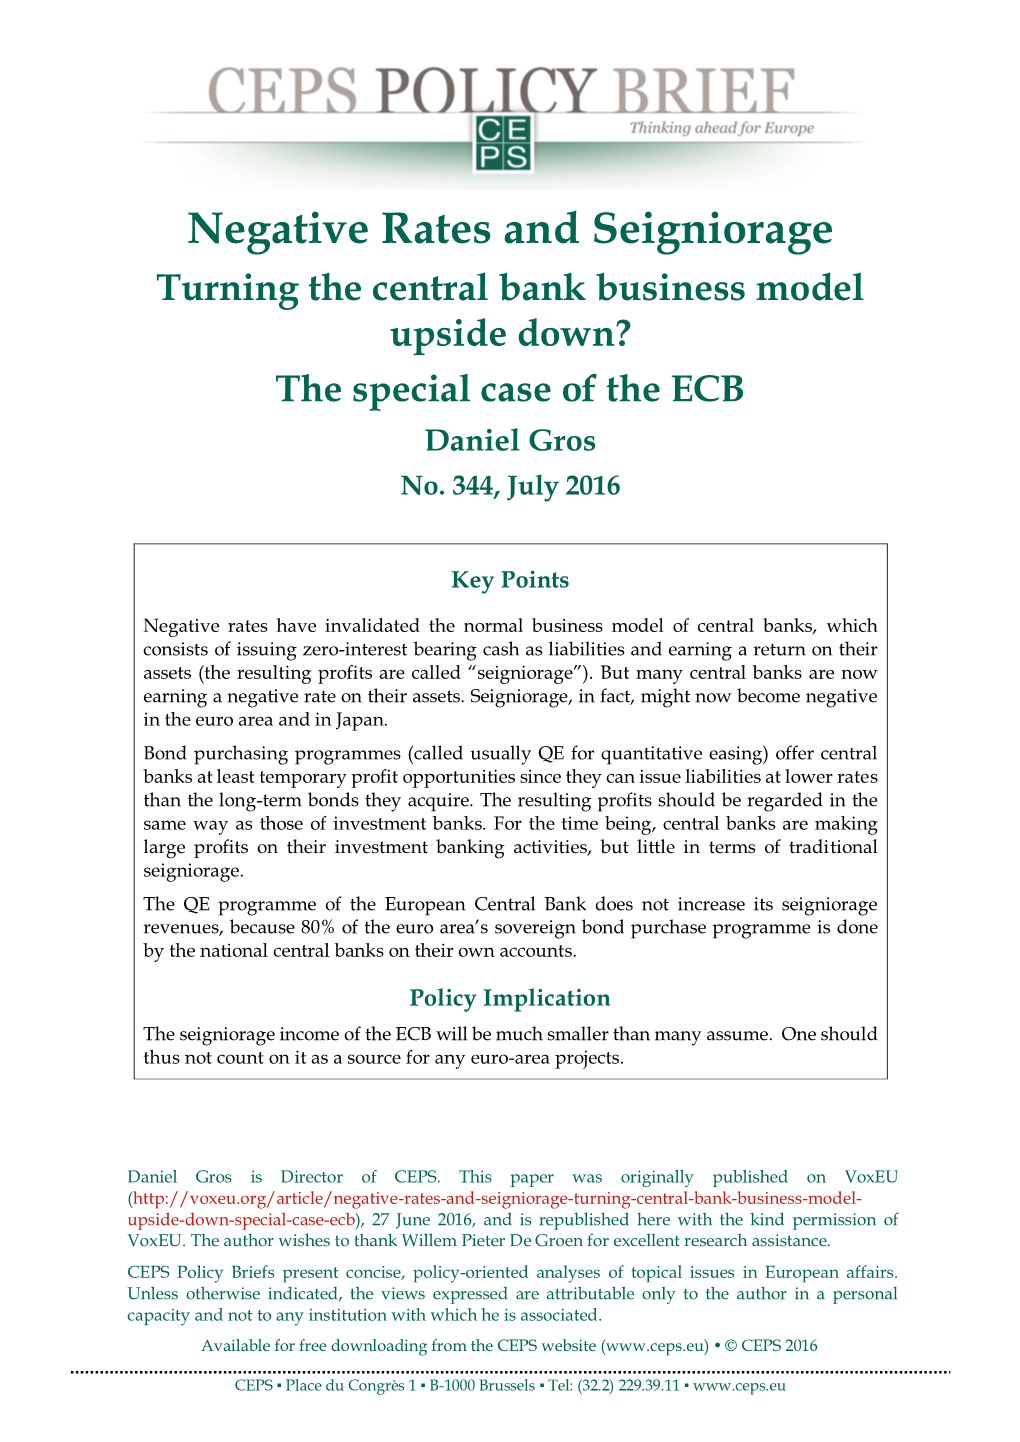 Negative Rates and Seigniorage Turning the Central Bank Business Model Upside Down? the Special Case of the ECB Daniel Gros No